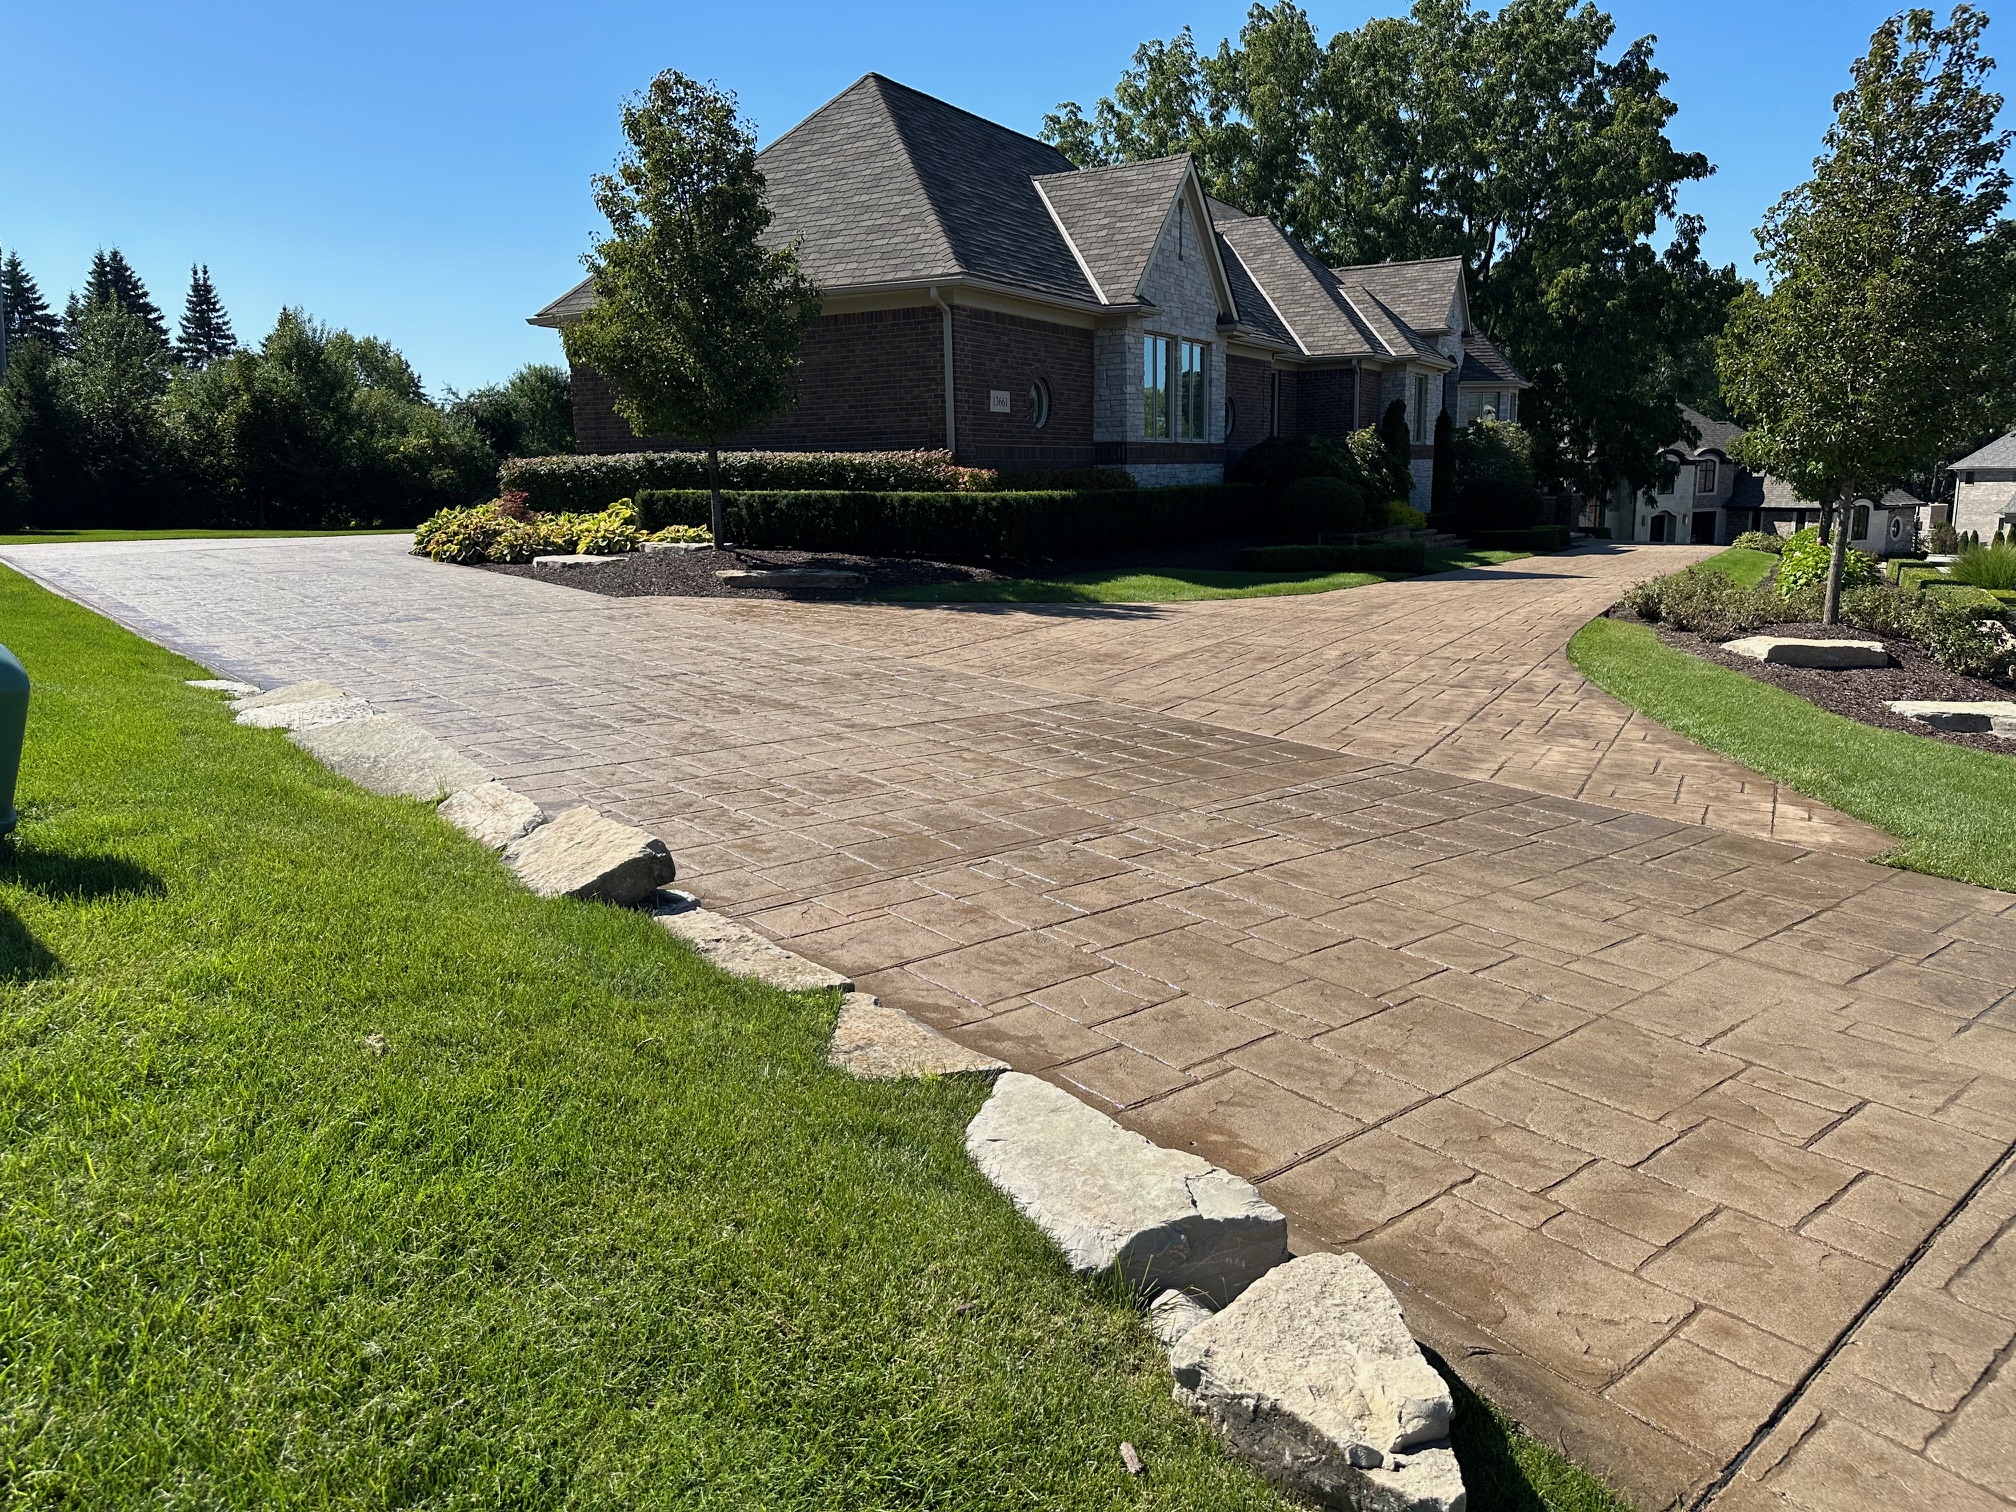 sealed driveway after driveway cleaning in Shelby township